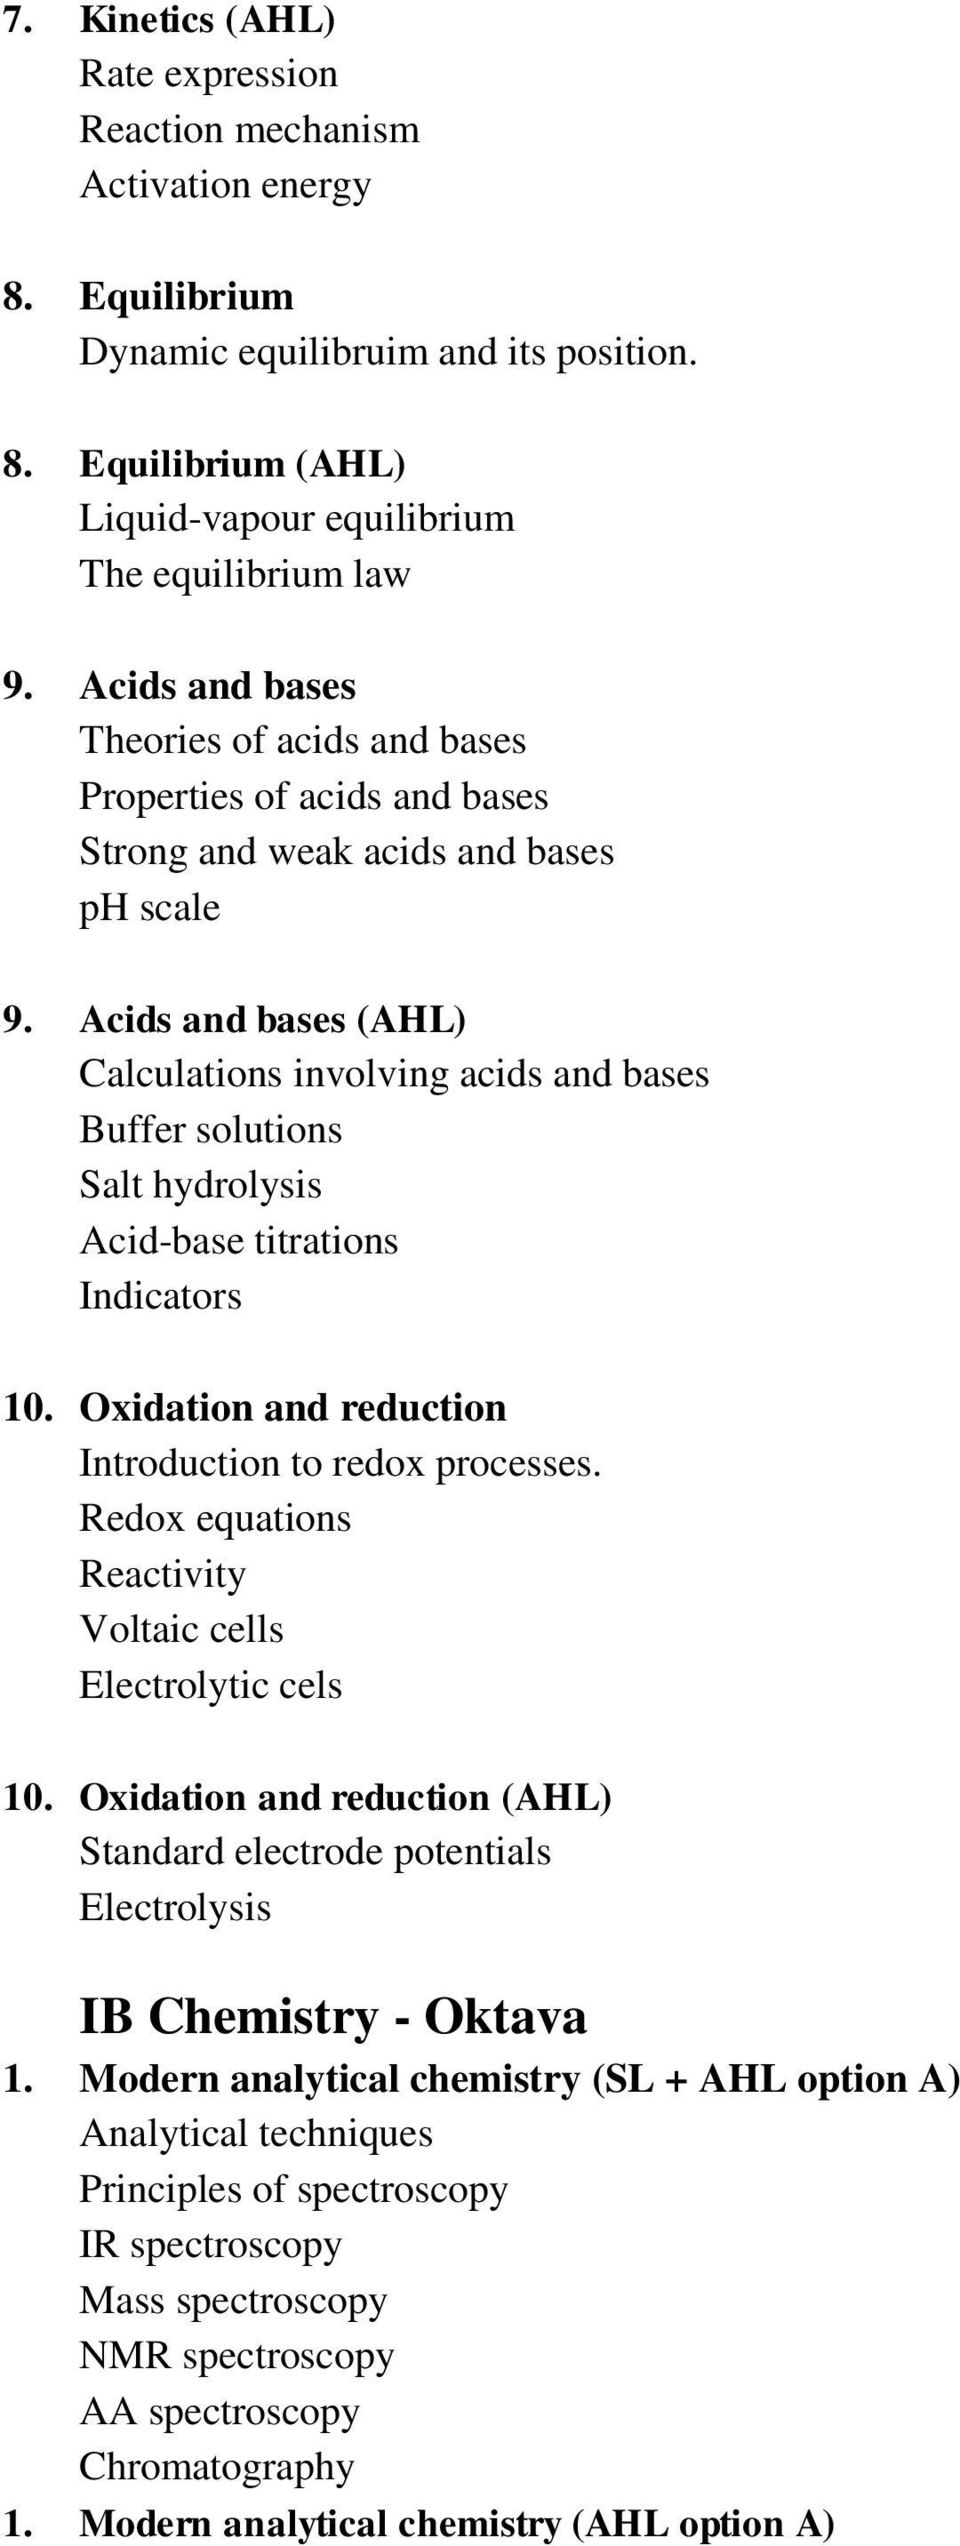 Acids and bases (AHL) Calculations involving acids and bases Buffer solutions Salt hydrolysis Acid-base titrations Indicators 10. Oxidation and reduction Introduction to redox processes.